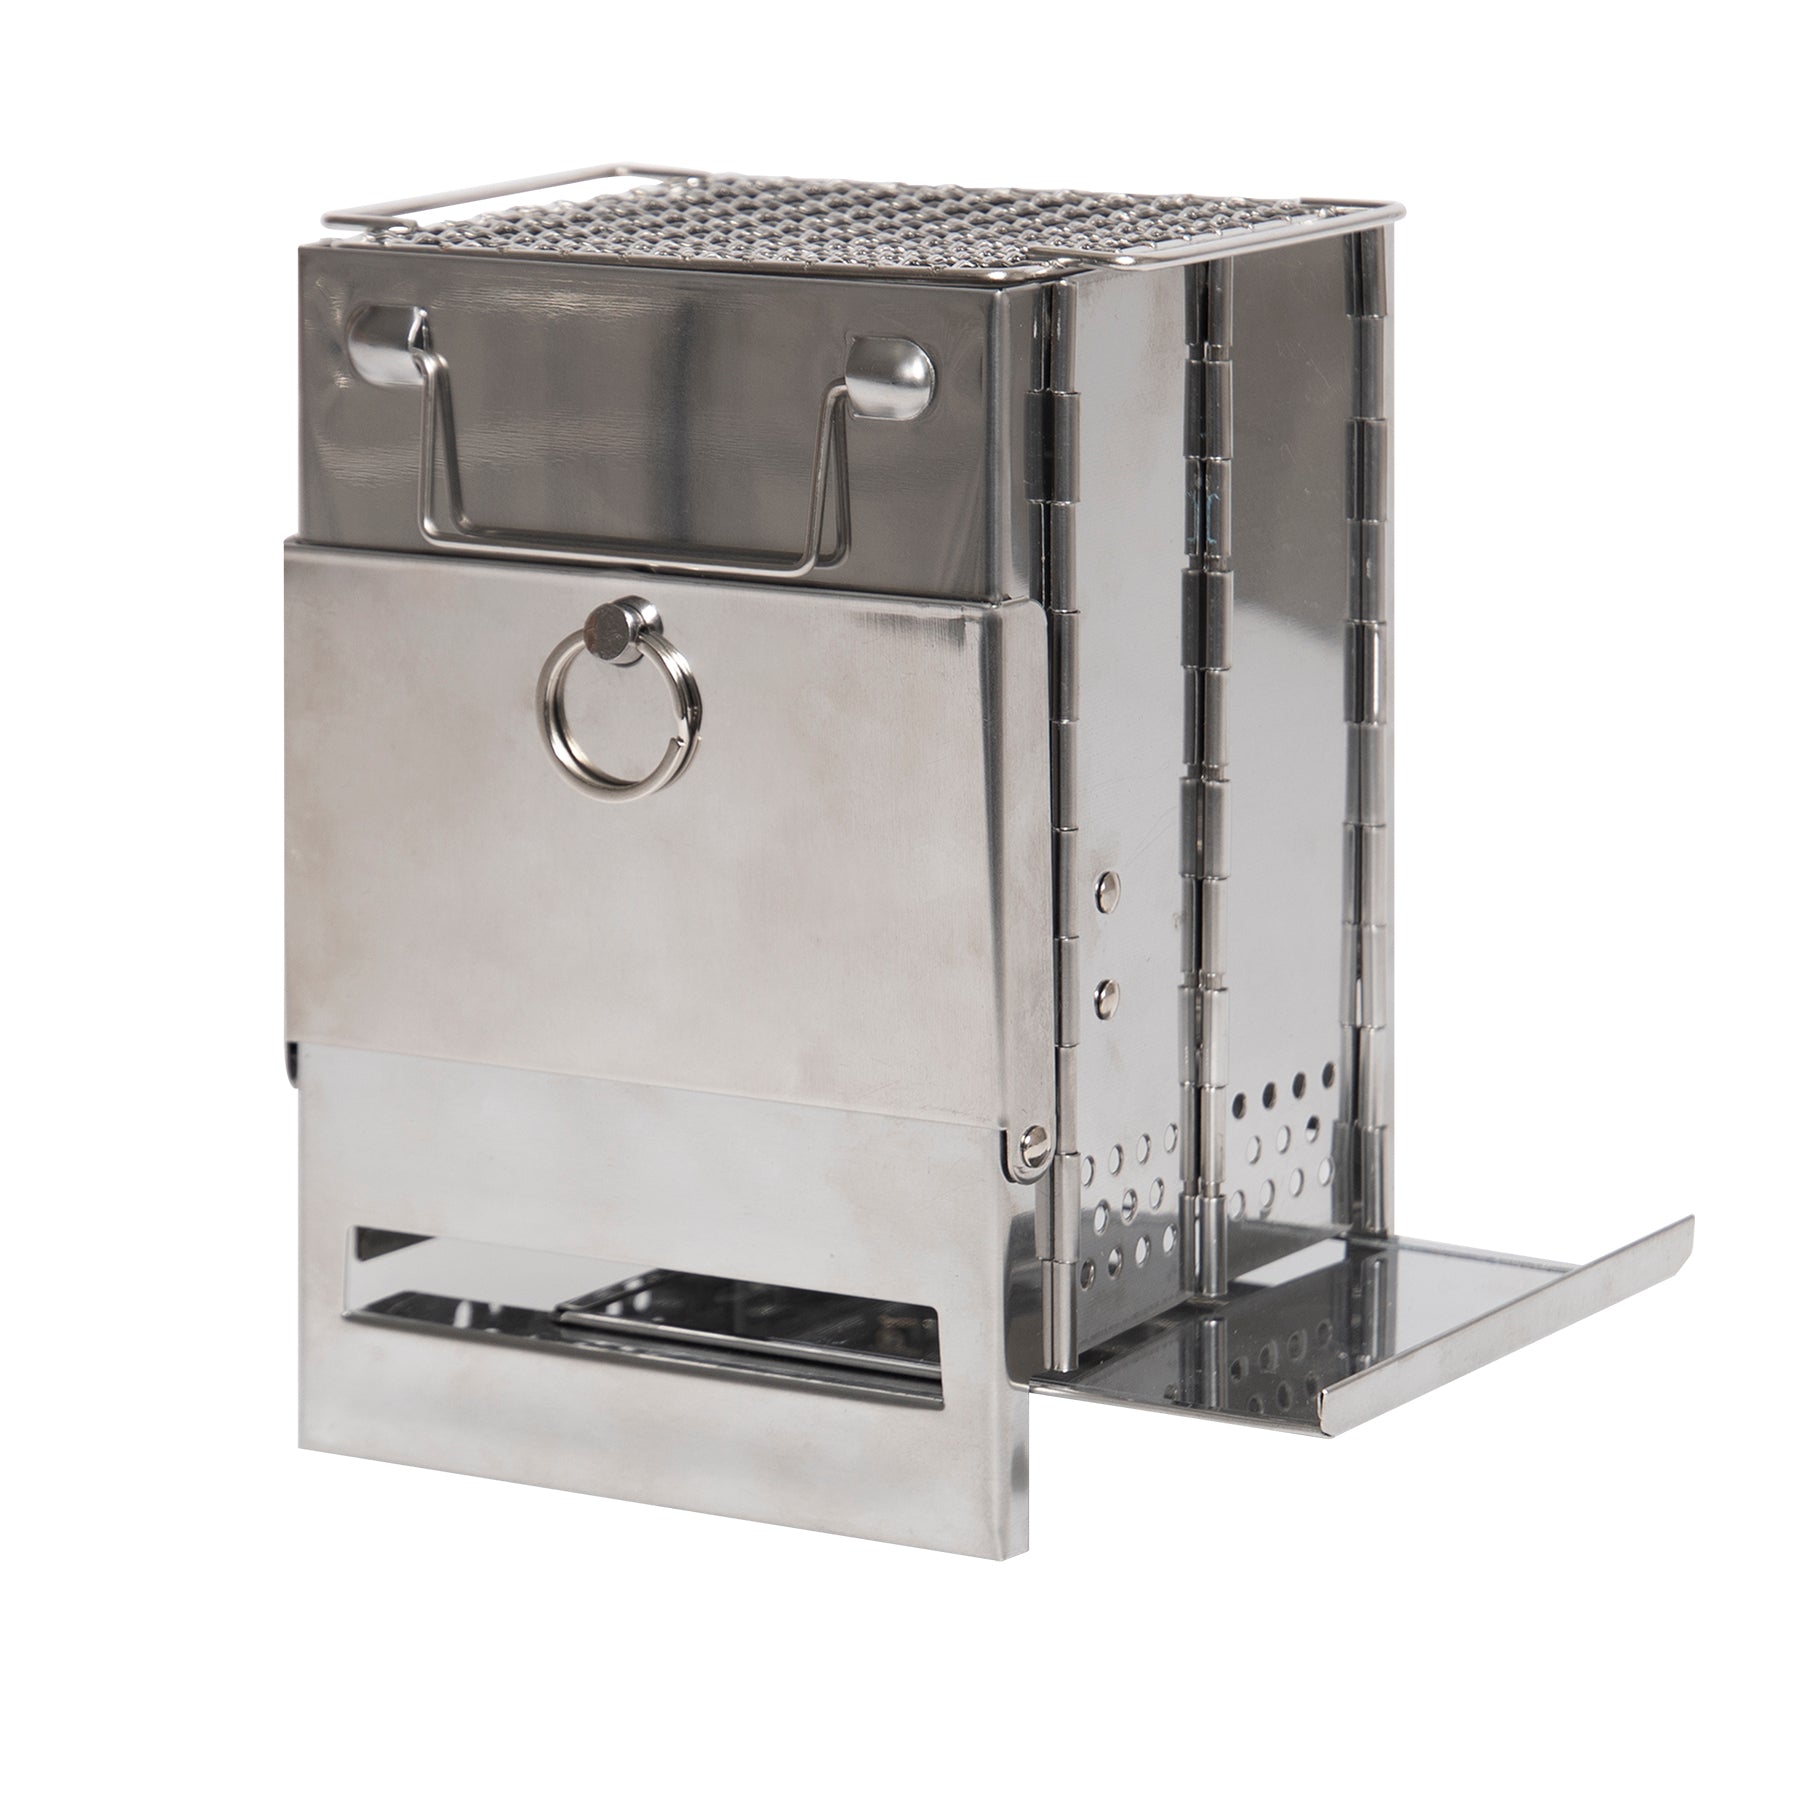 Stainless Steel Folding Camp Stove - Tactical Choice Plus